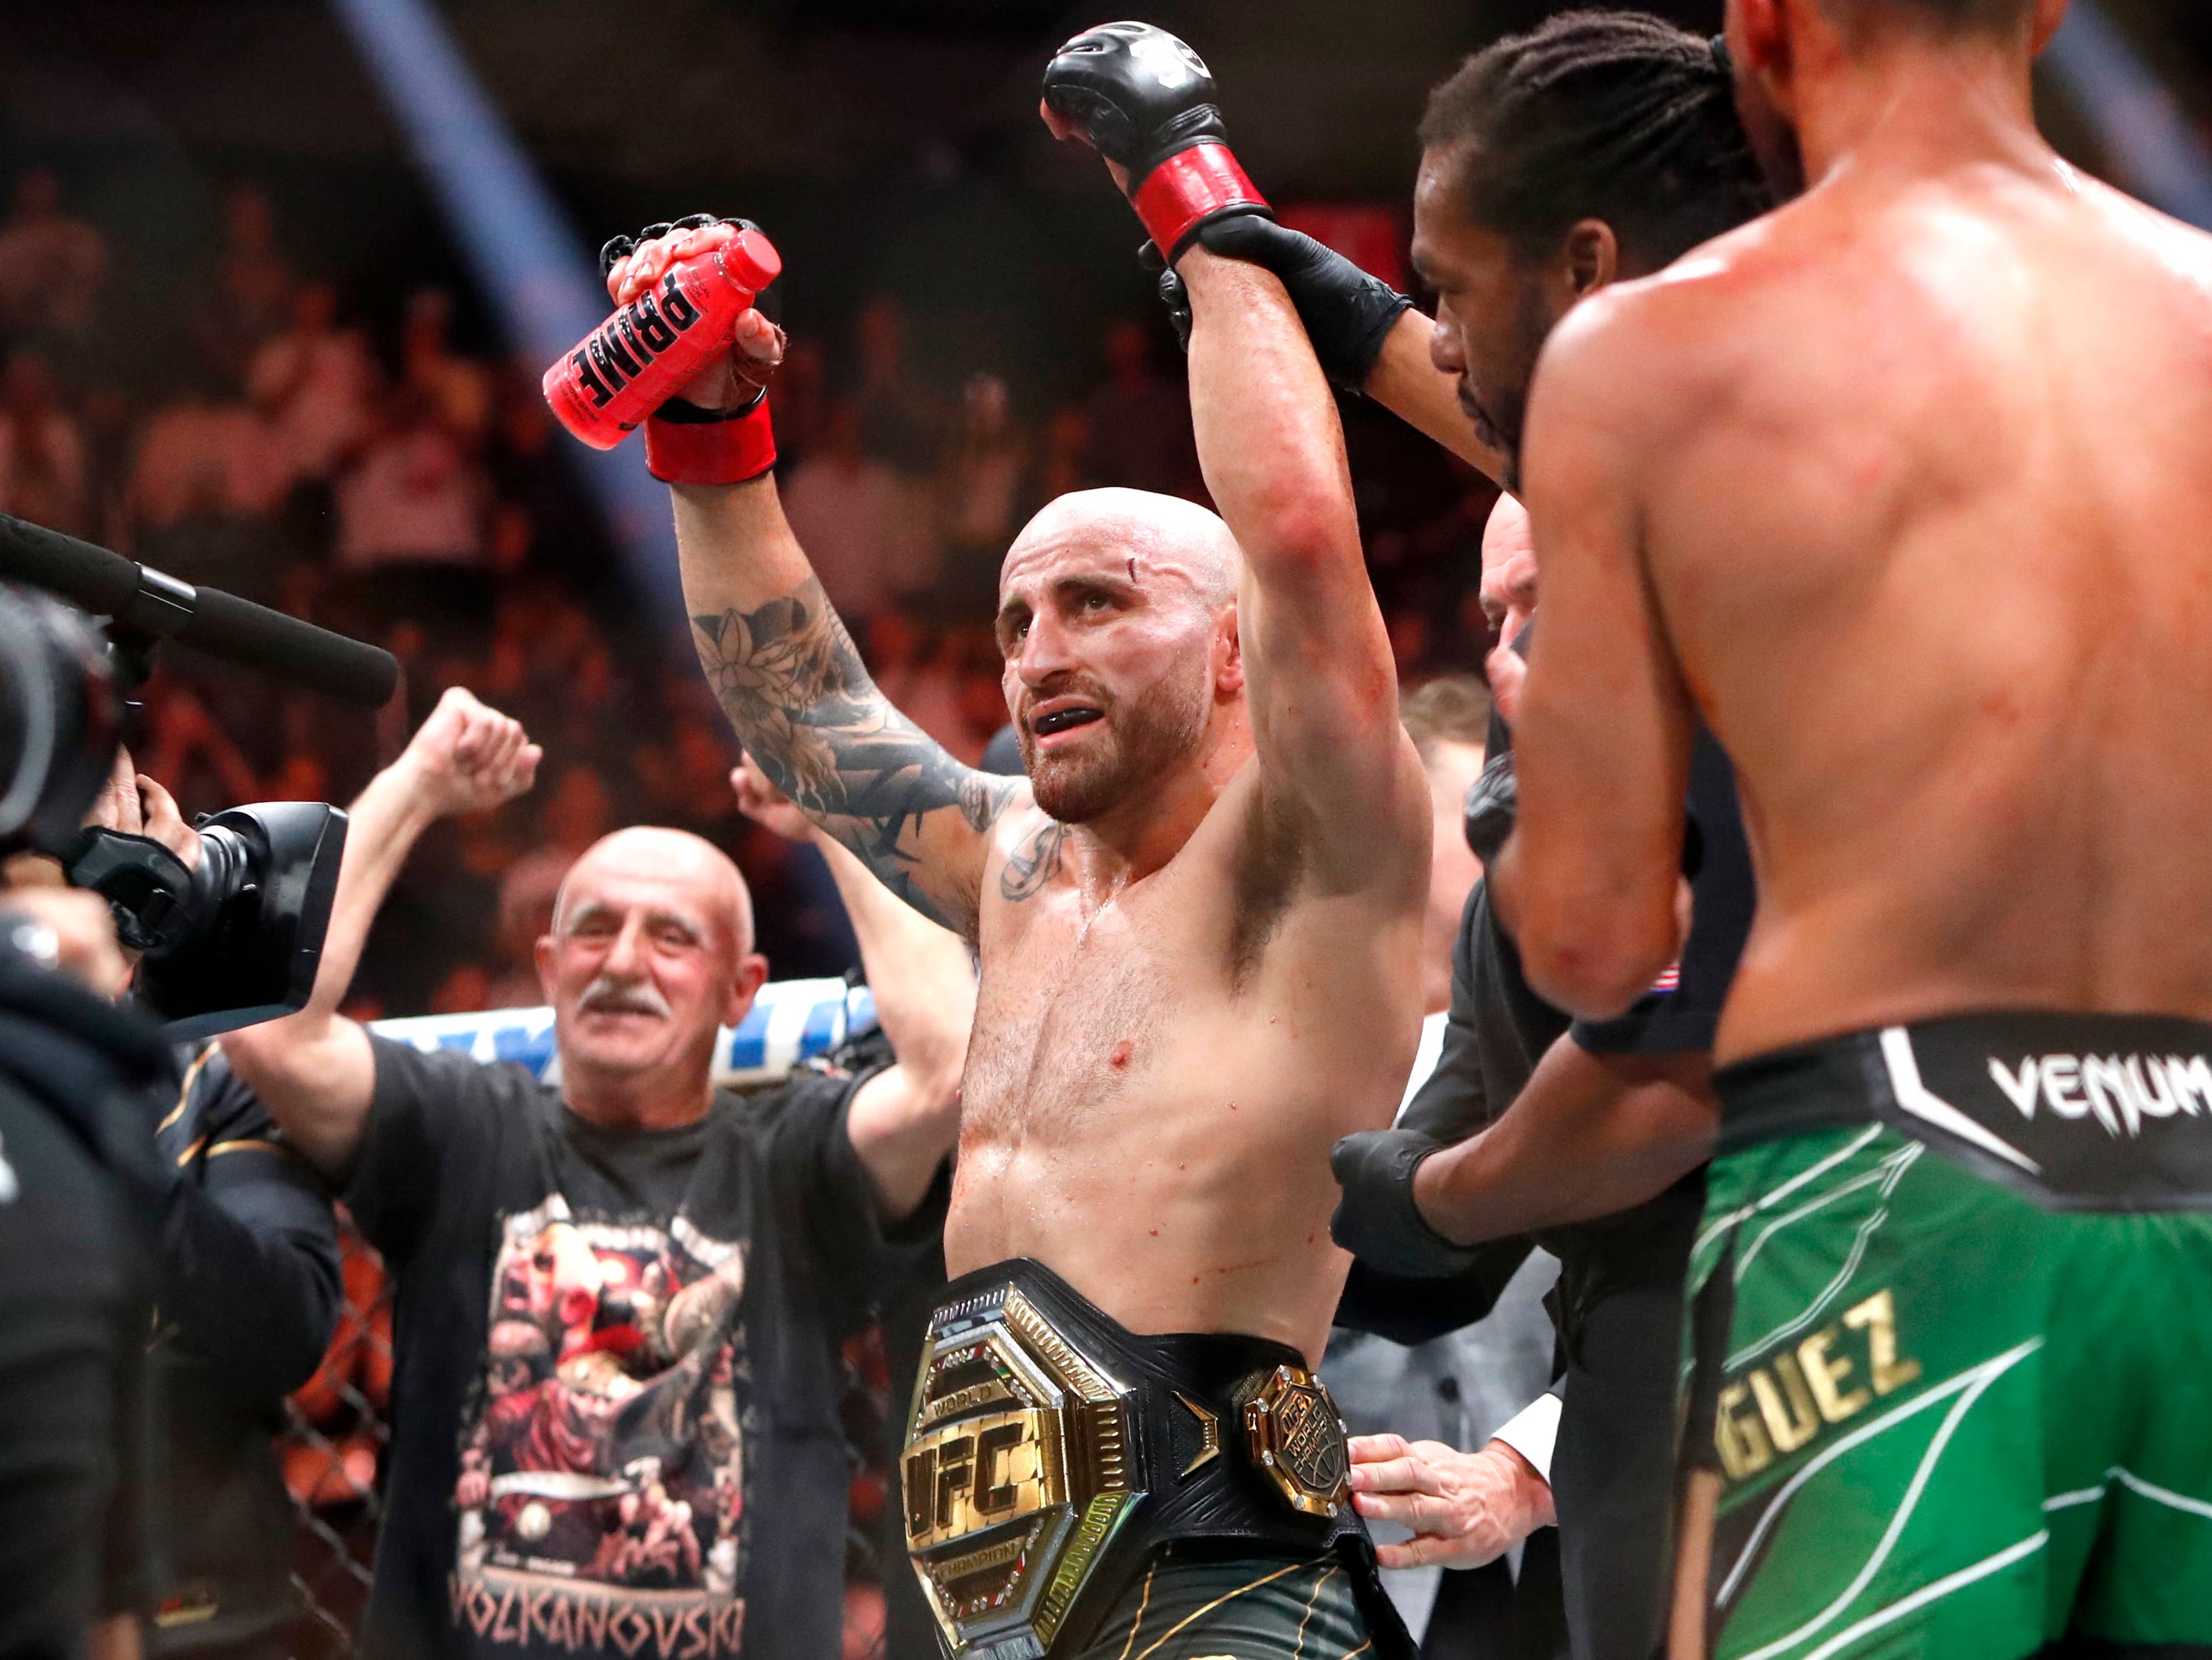 Between his losses to Makhachev, Volkanovski stopped Yair Rodriguez to retain his title